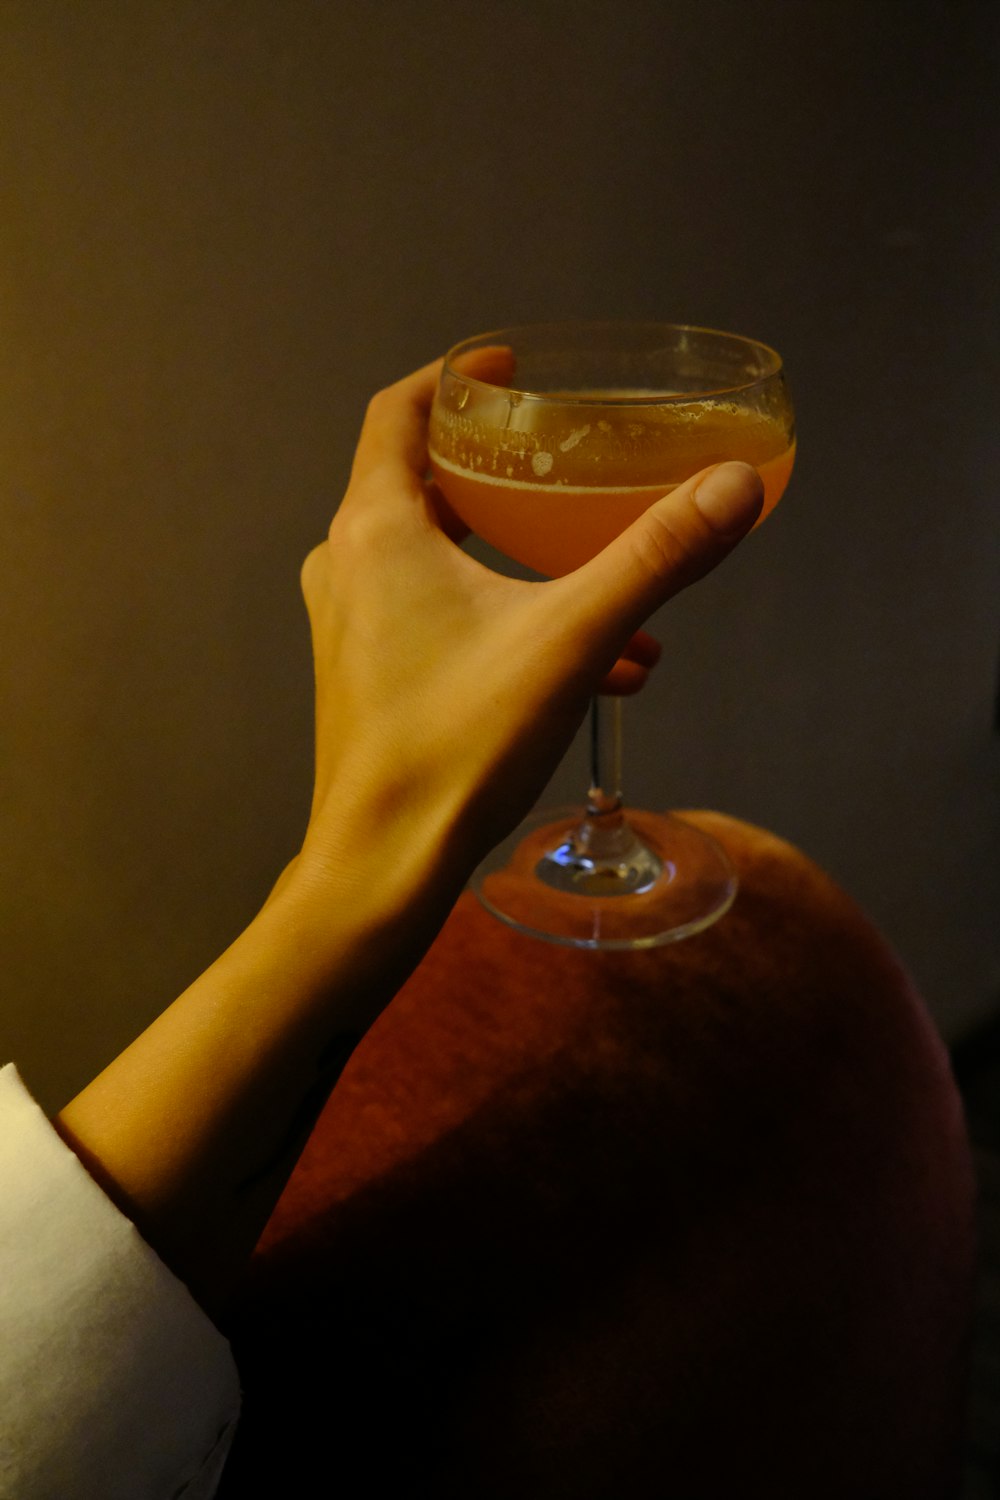 person holding clear wine glass with brown liquid